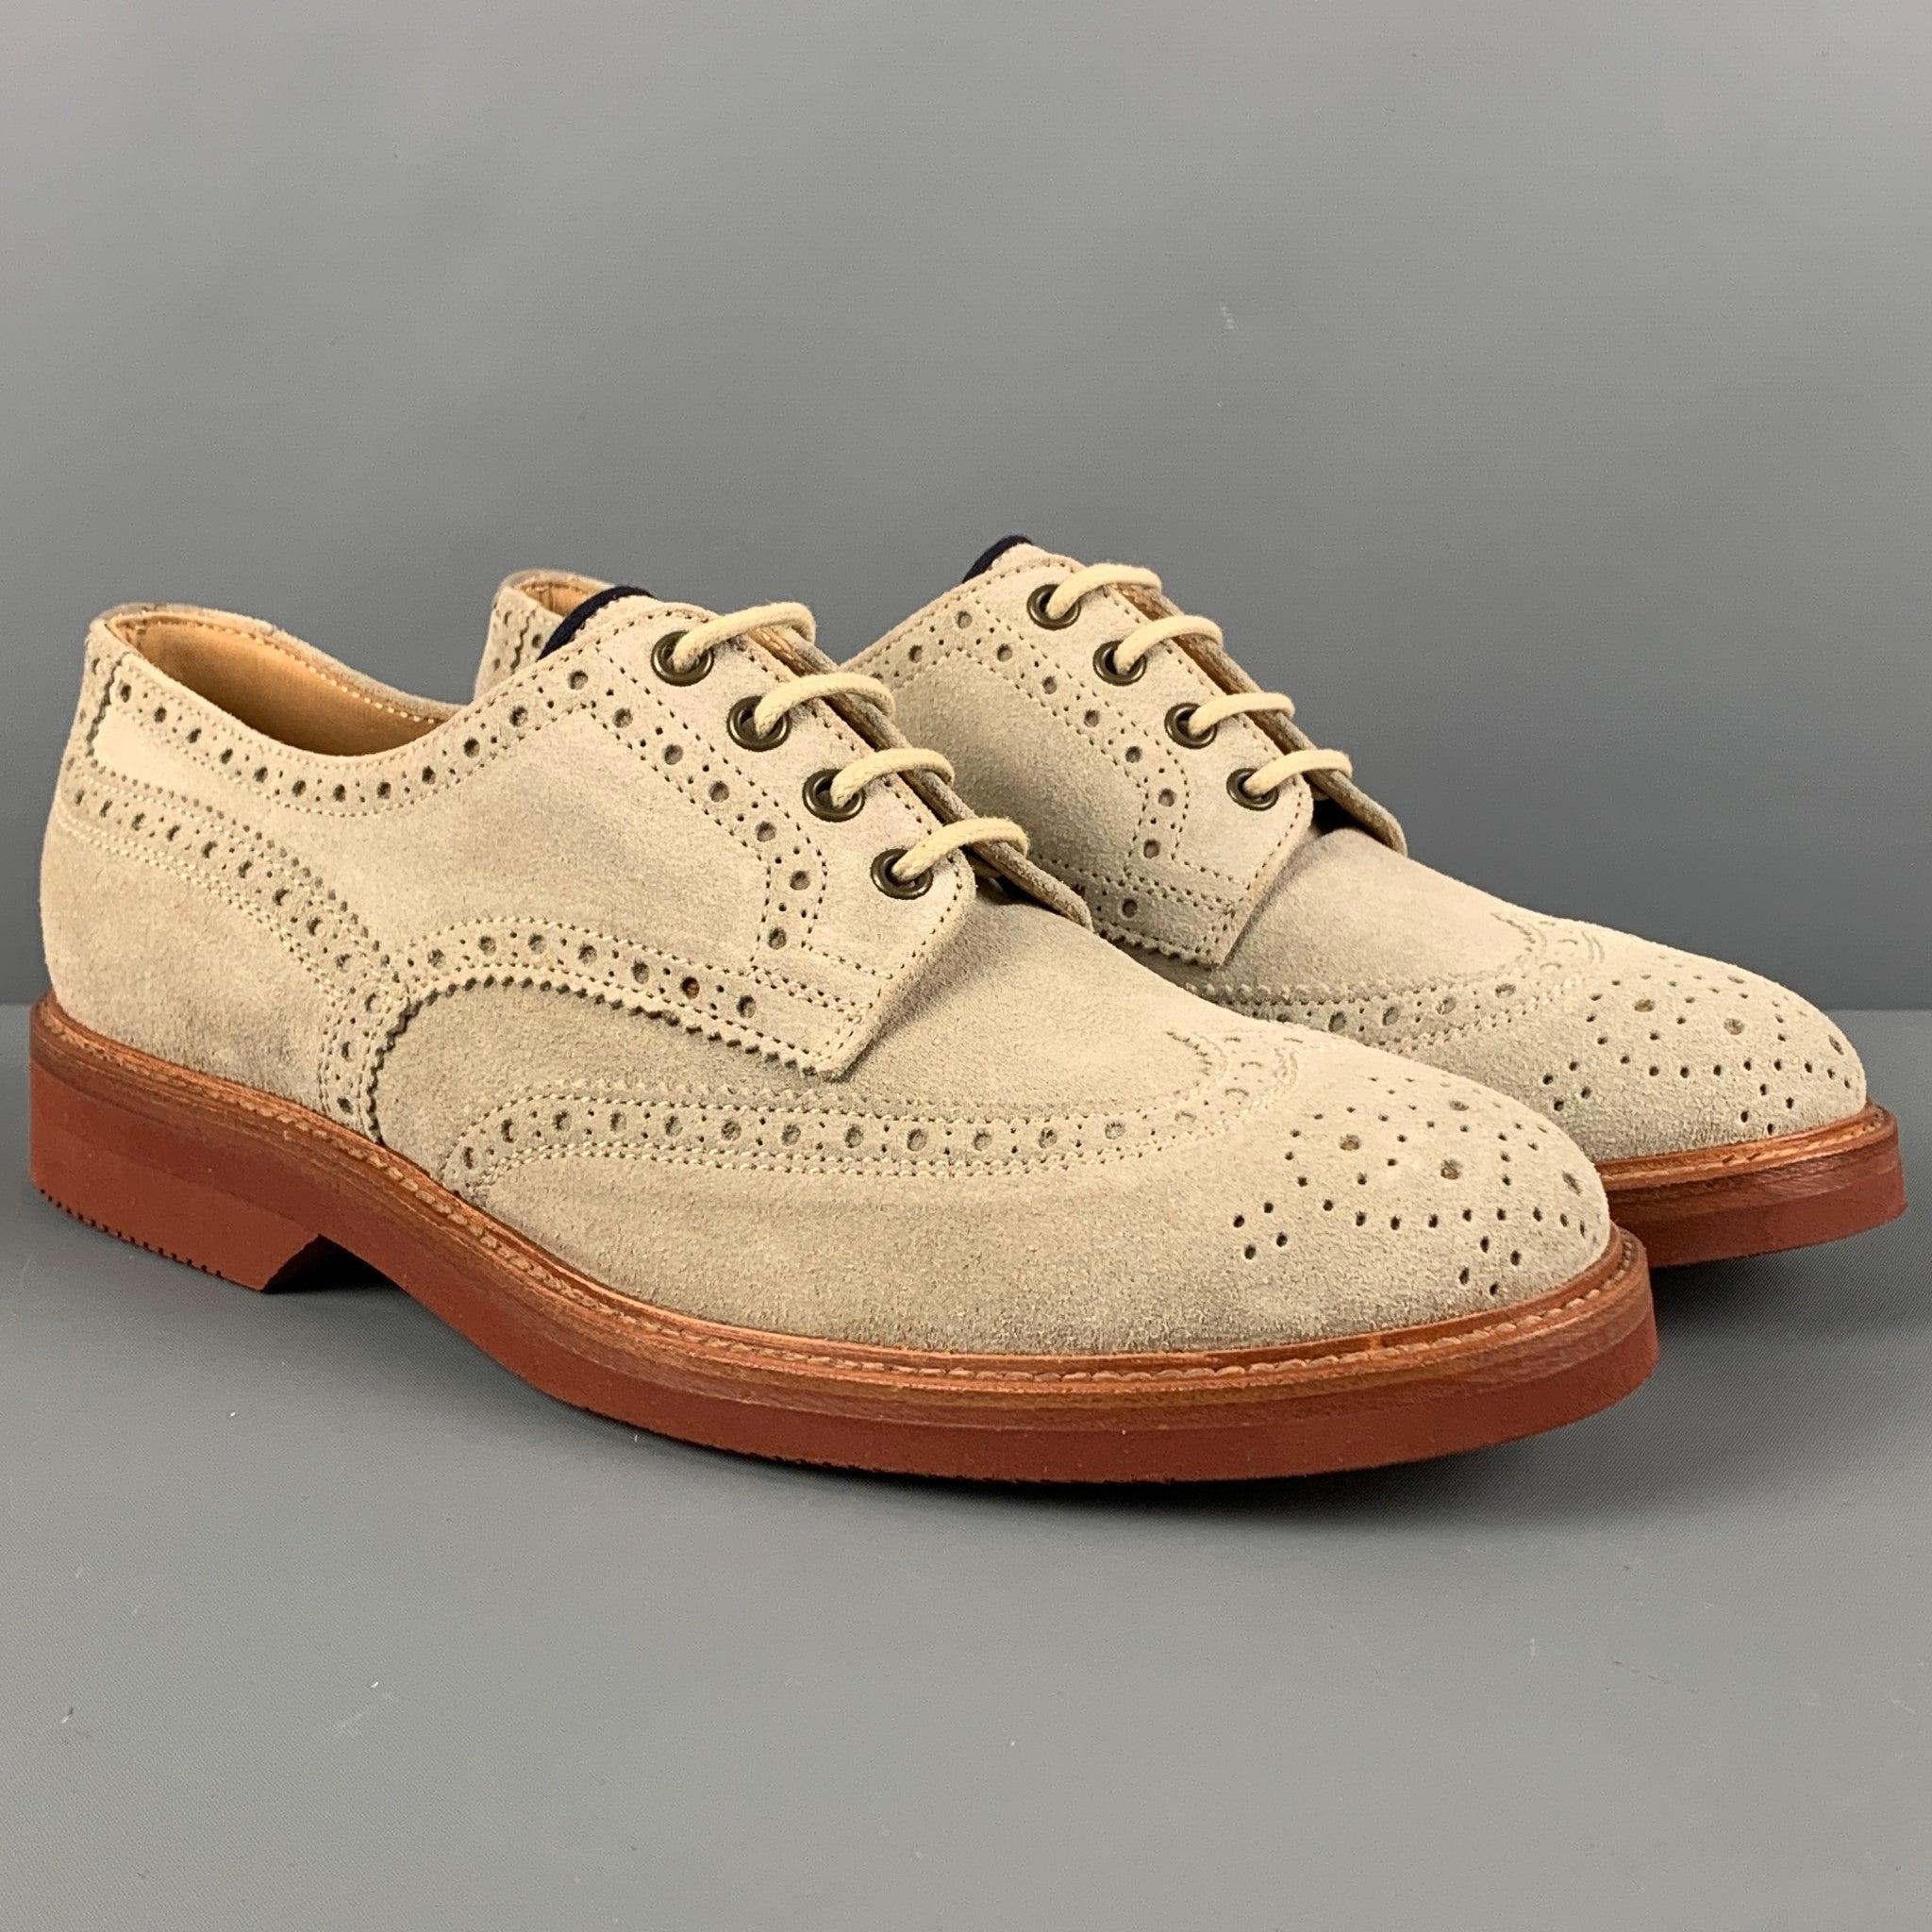 BRUNELLO CUCINELLI Size 9.5 Beige Brown Wingtip Brogue Lace Up Shoes In Good Condition For Sale In San Francisco, CA